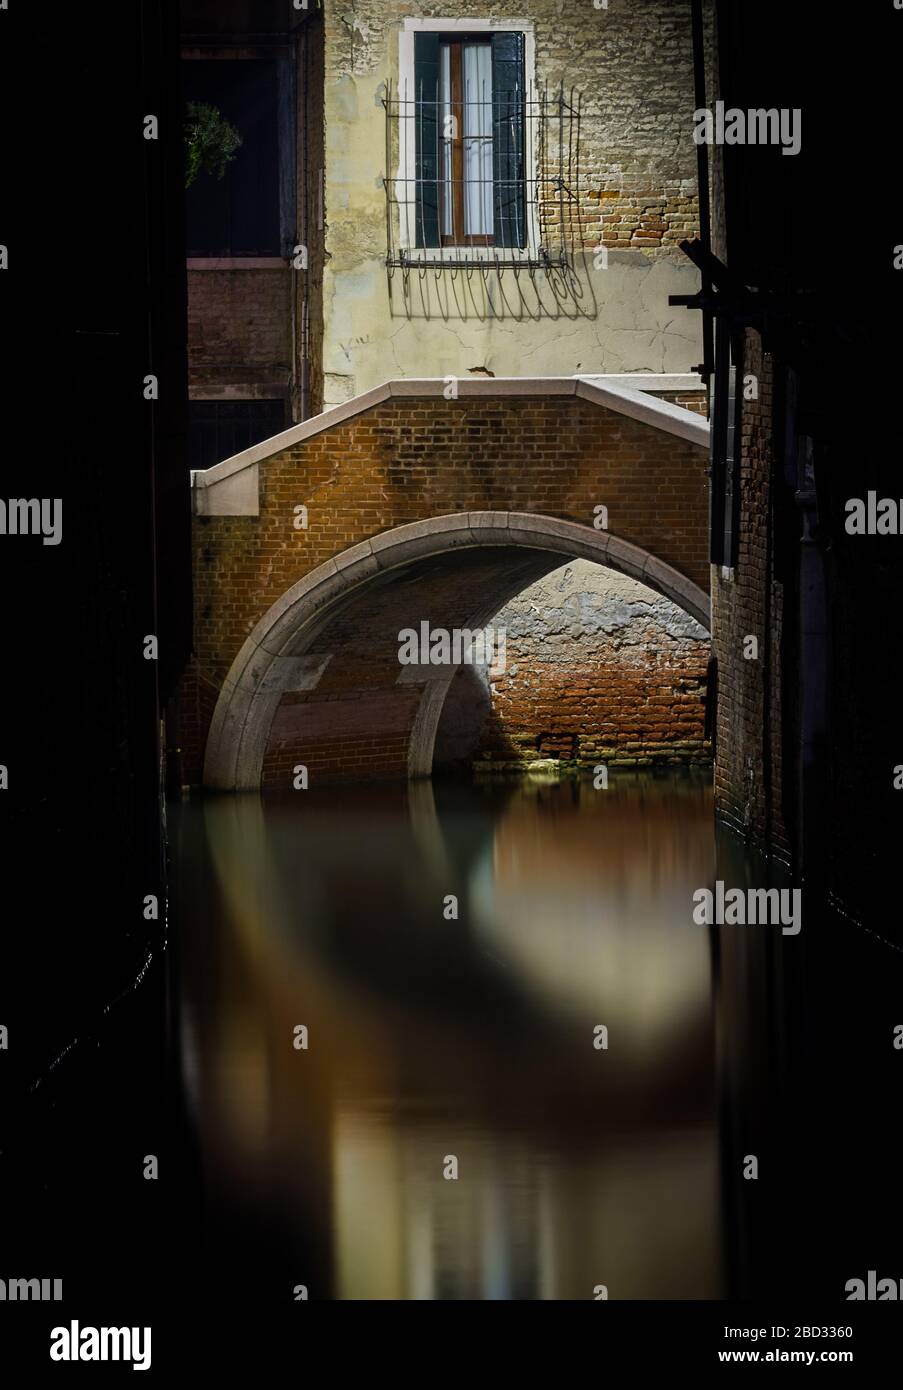 Night shot of a lonely round stone bridge, partially hidden and framed by two dark walls, reflecting on a Venetian canal Stock Photo